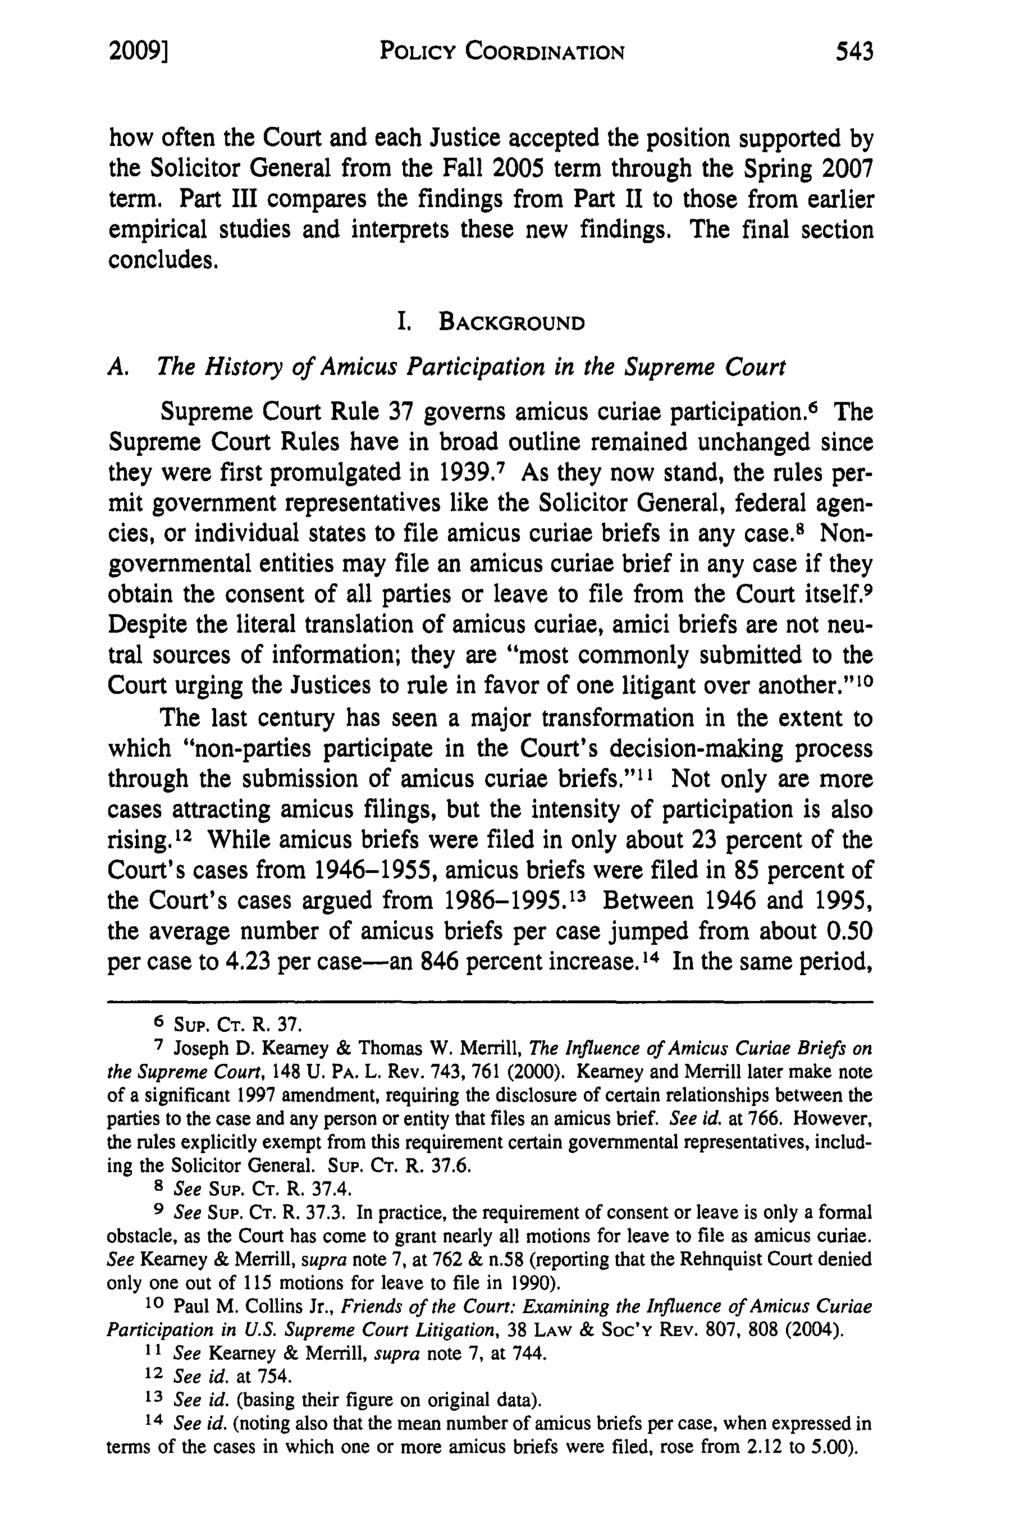 2009] POLICY COORDINATION how often the Court and each Justice accepted the position supported by the Solicitor General from the Fall 2005 term through the Spring 2007 term.